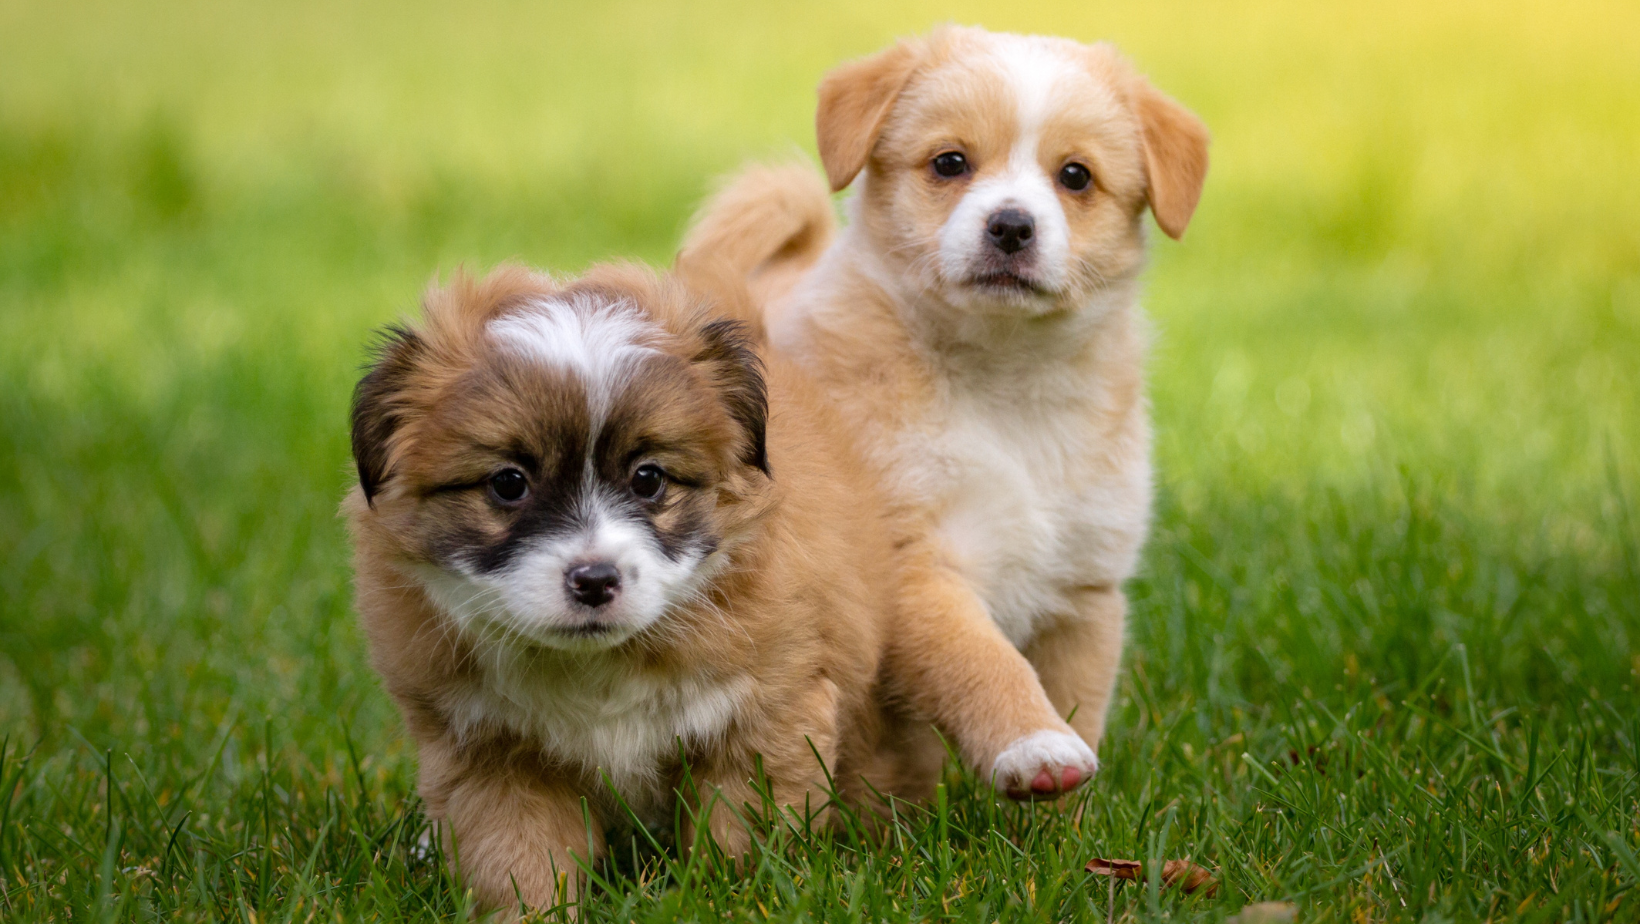 How To Understand What Your New Puppy Is Telling You